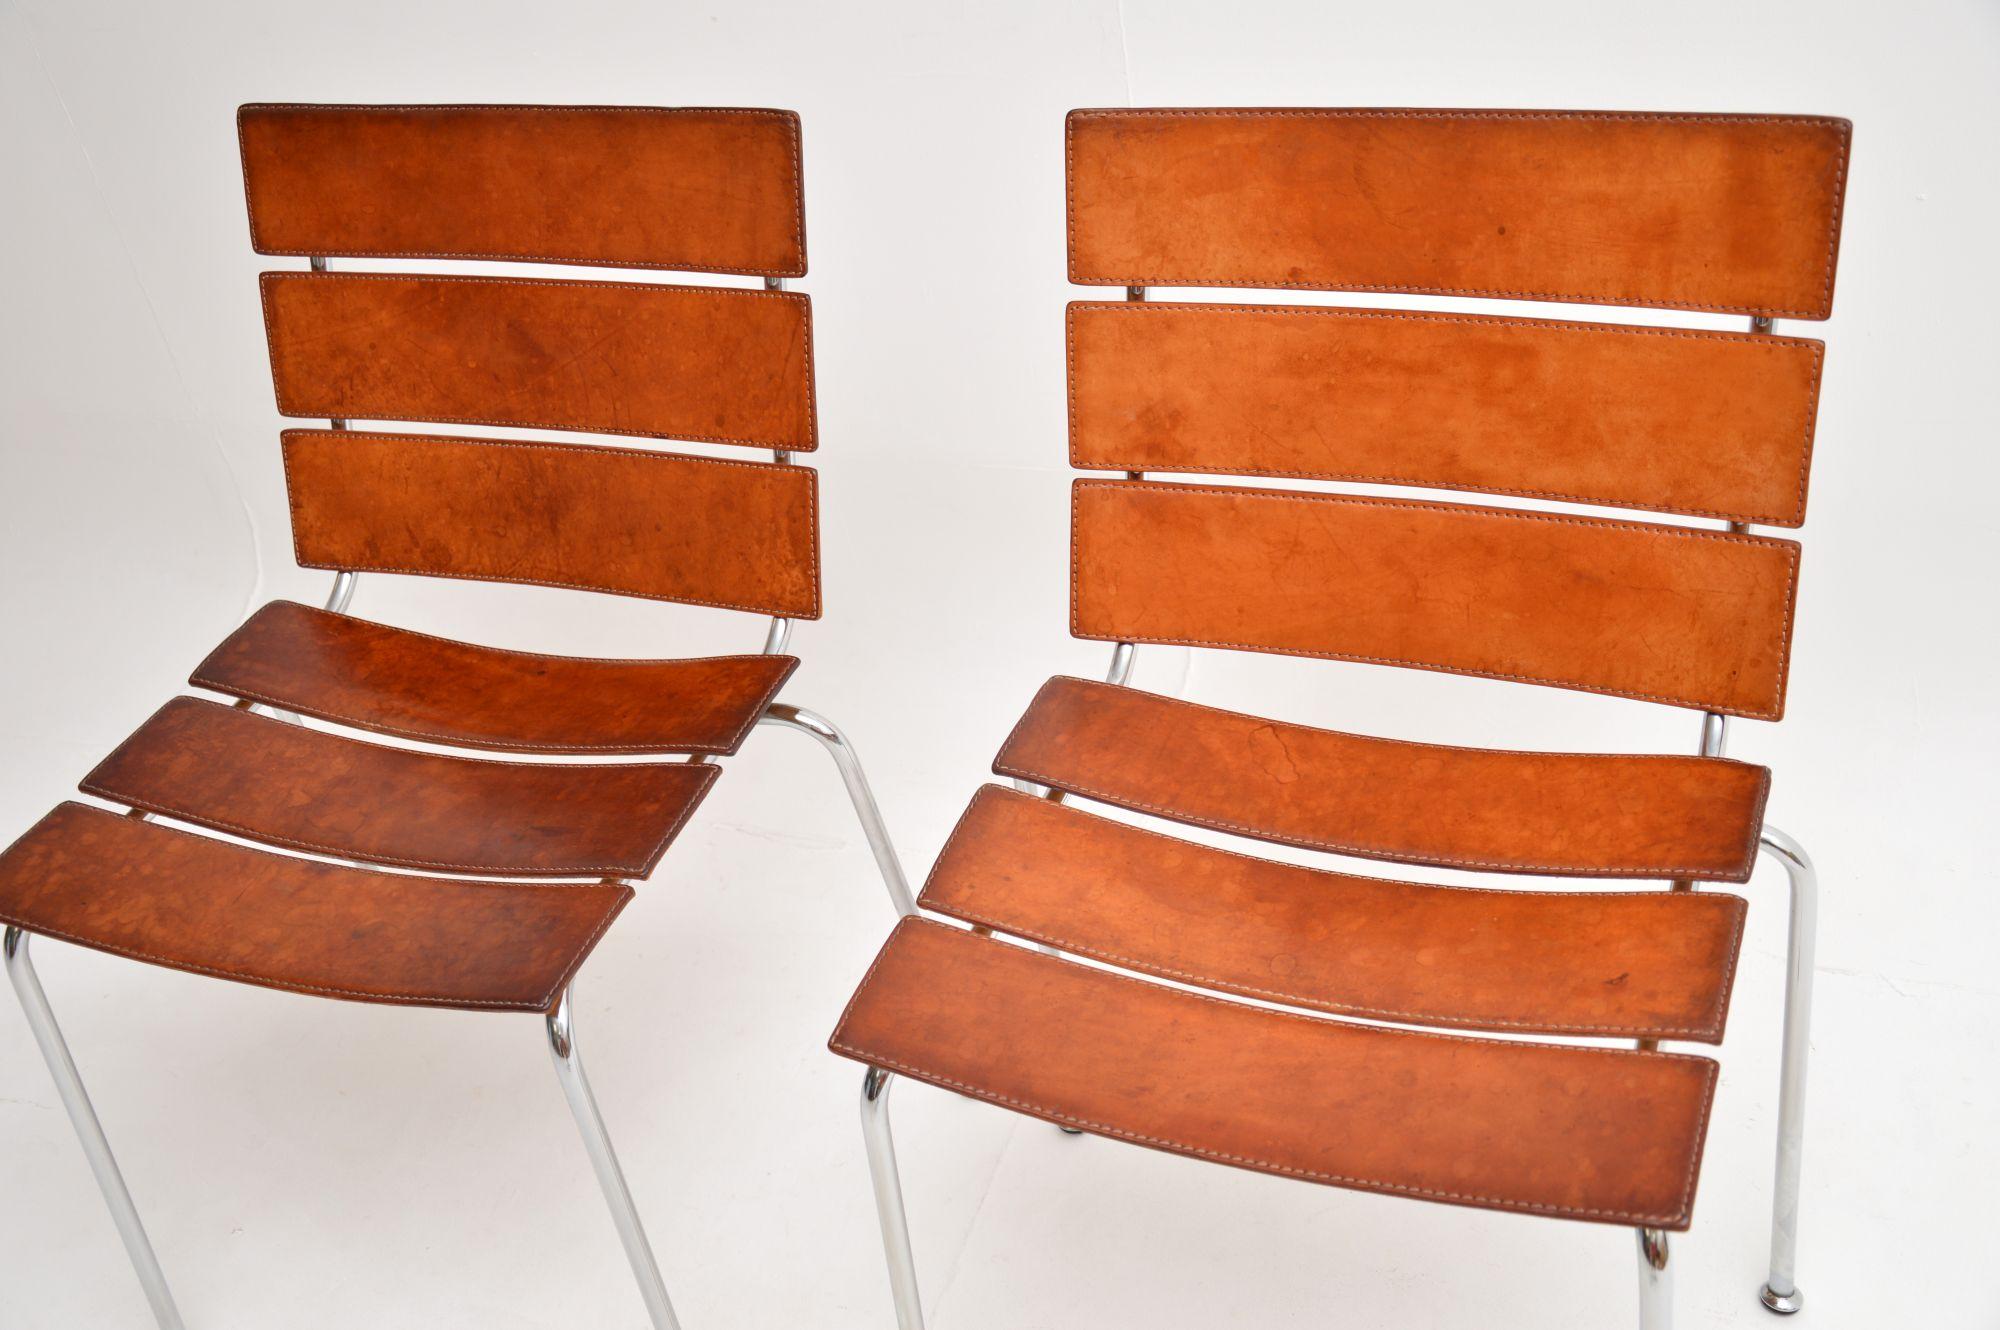 1970’s Pair of Vintage Italian Leather & Chrome ‘Stripe’ Chairs by Giancarlo Veg For Sale 1